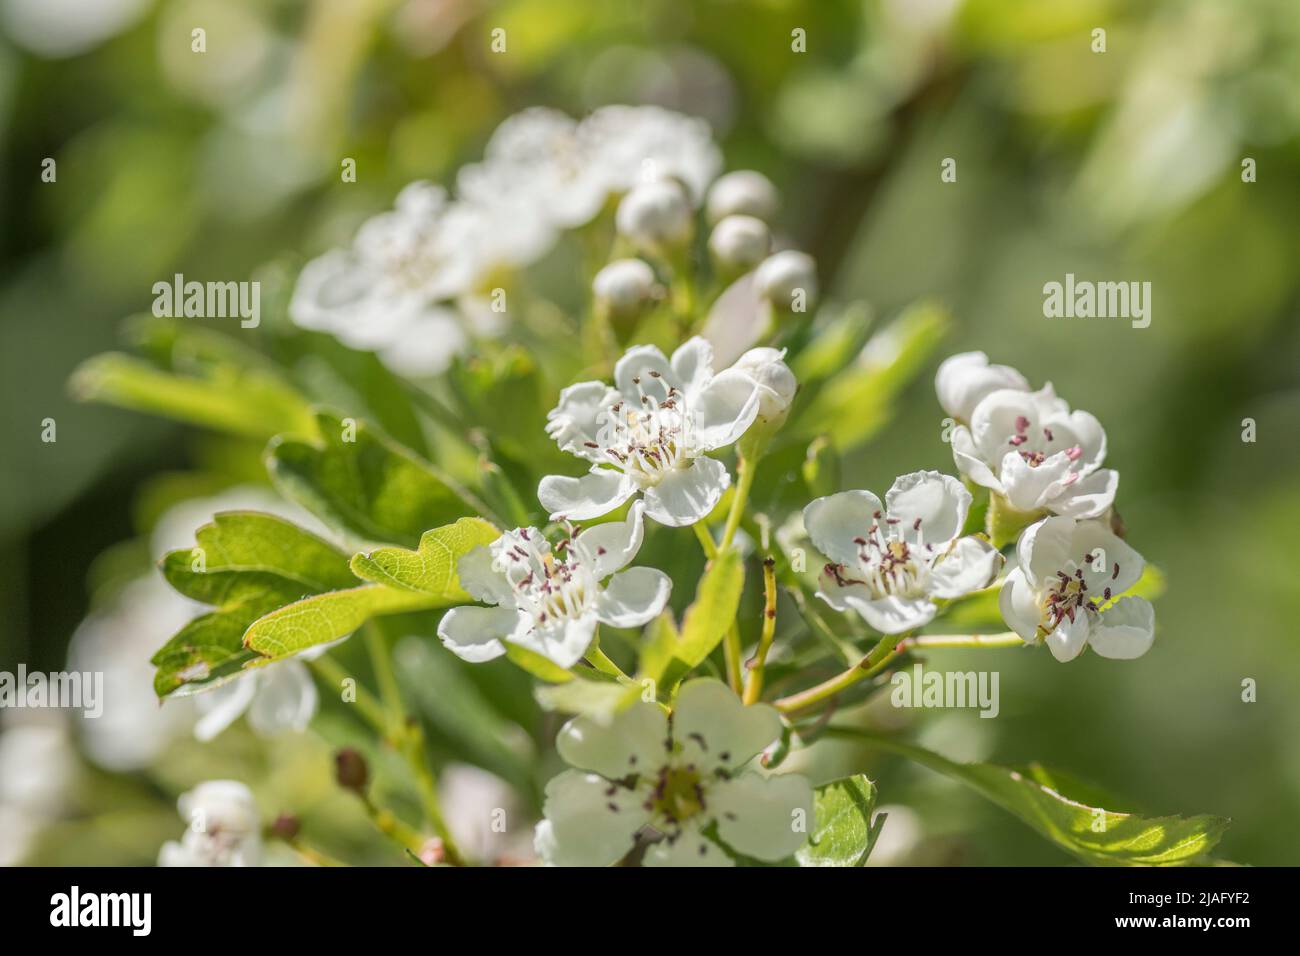 Close-up of white flower blossom of Common Hawthorn tree / Crataegus monogyna blossom. For May blossom and medicinal plants used for herbal cures. Stock Photo